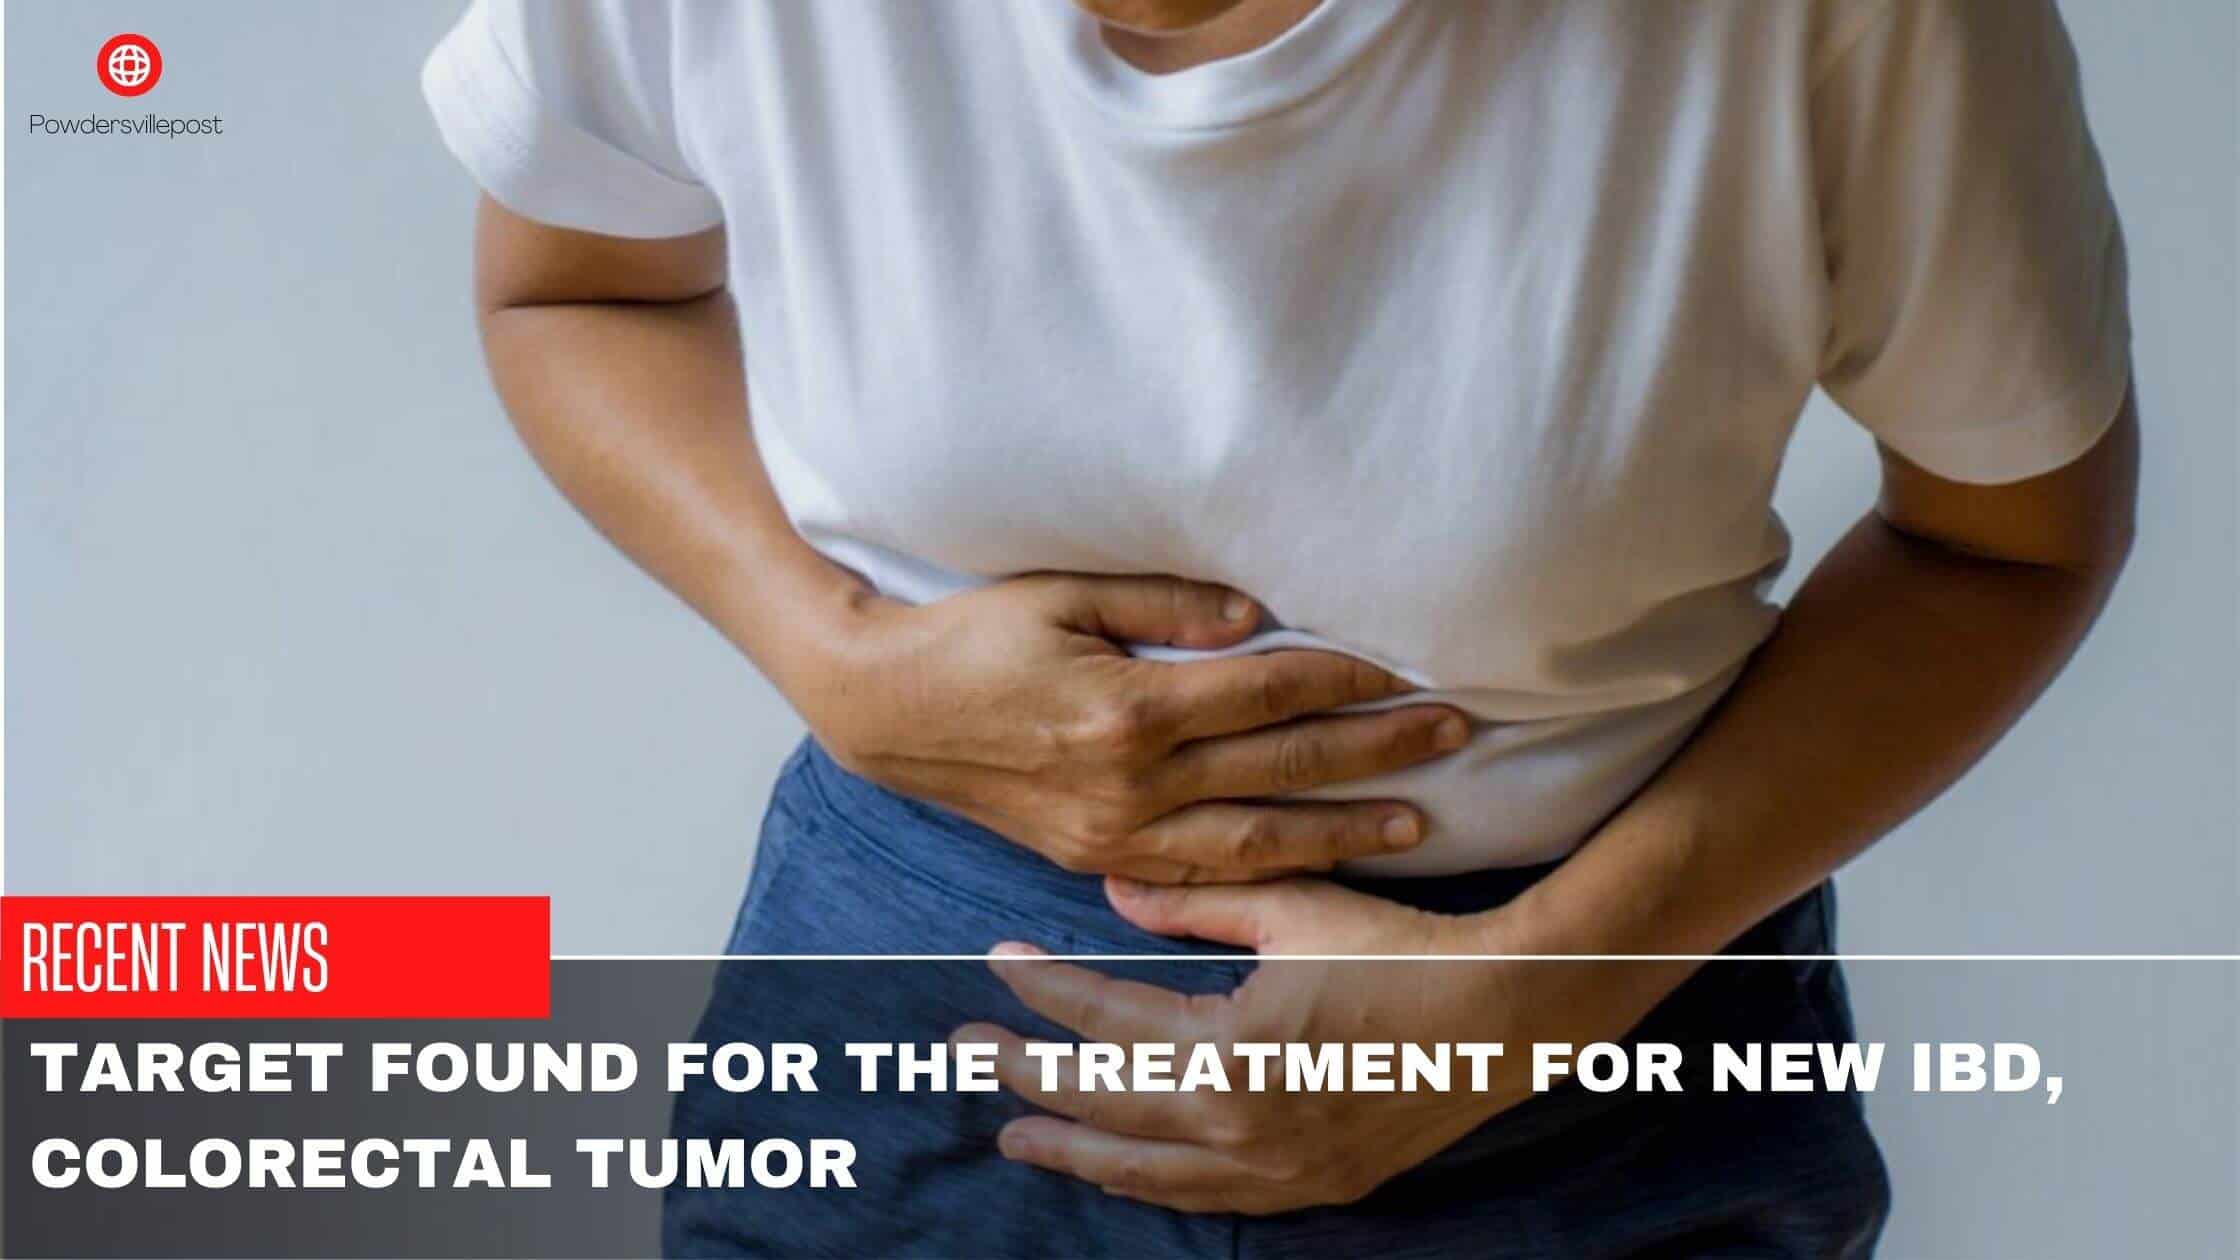 Target Found For The Treatment For New IBD, Colorectal Tumor